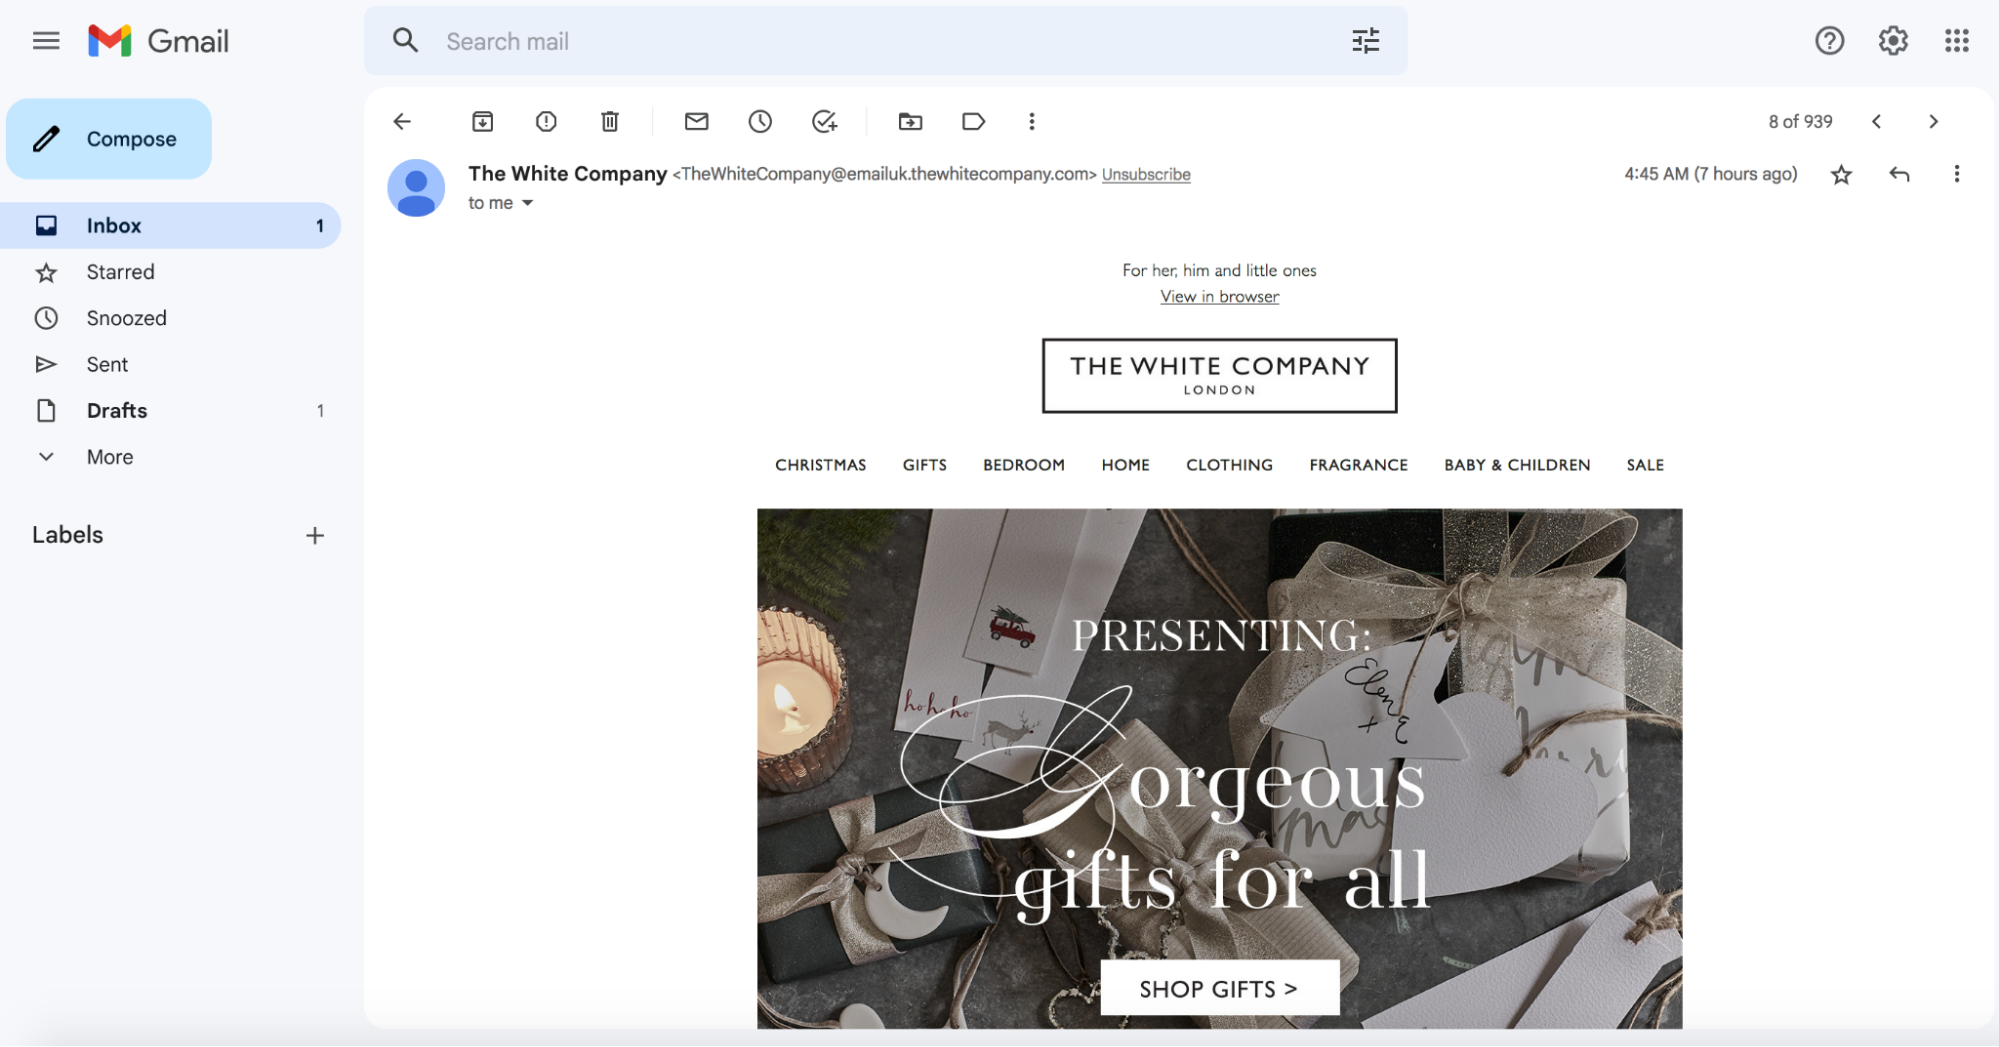 The White Company’s promotional holiday email.